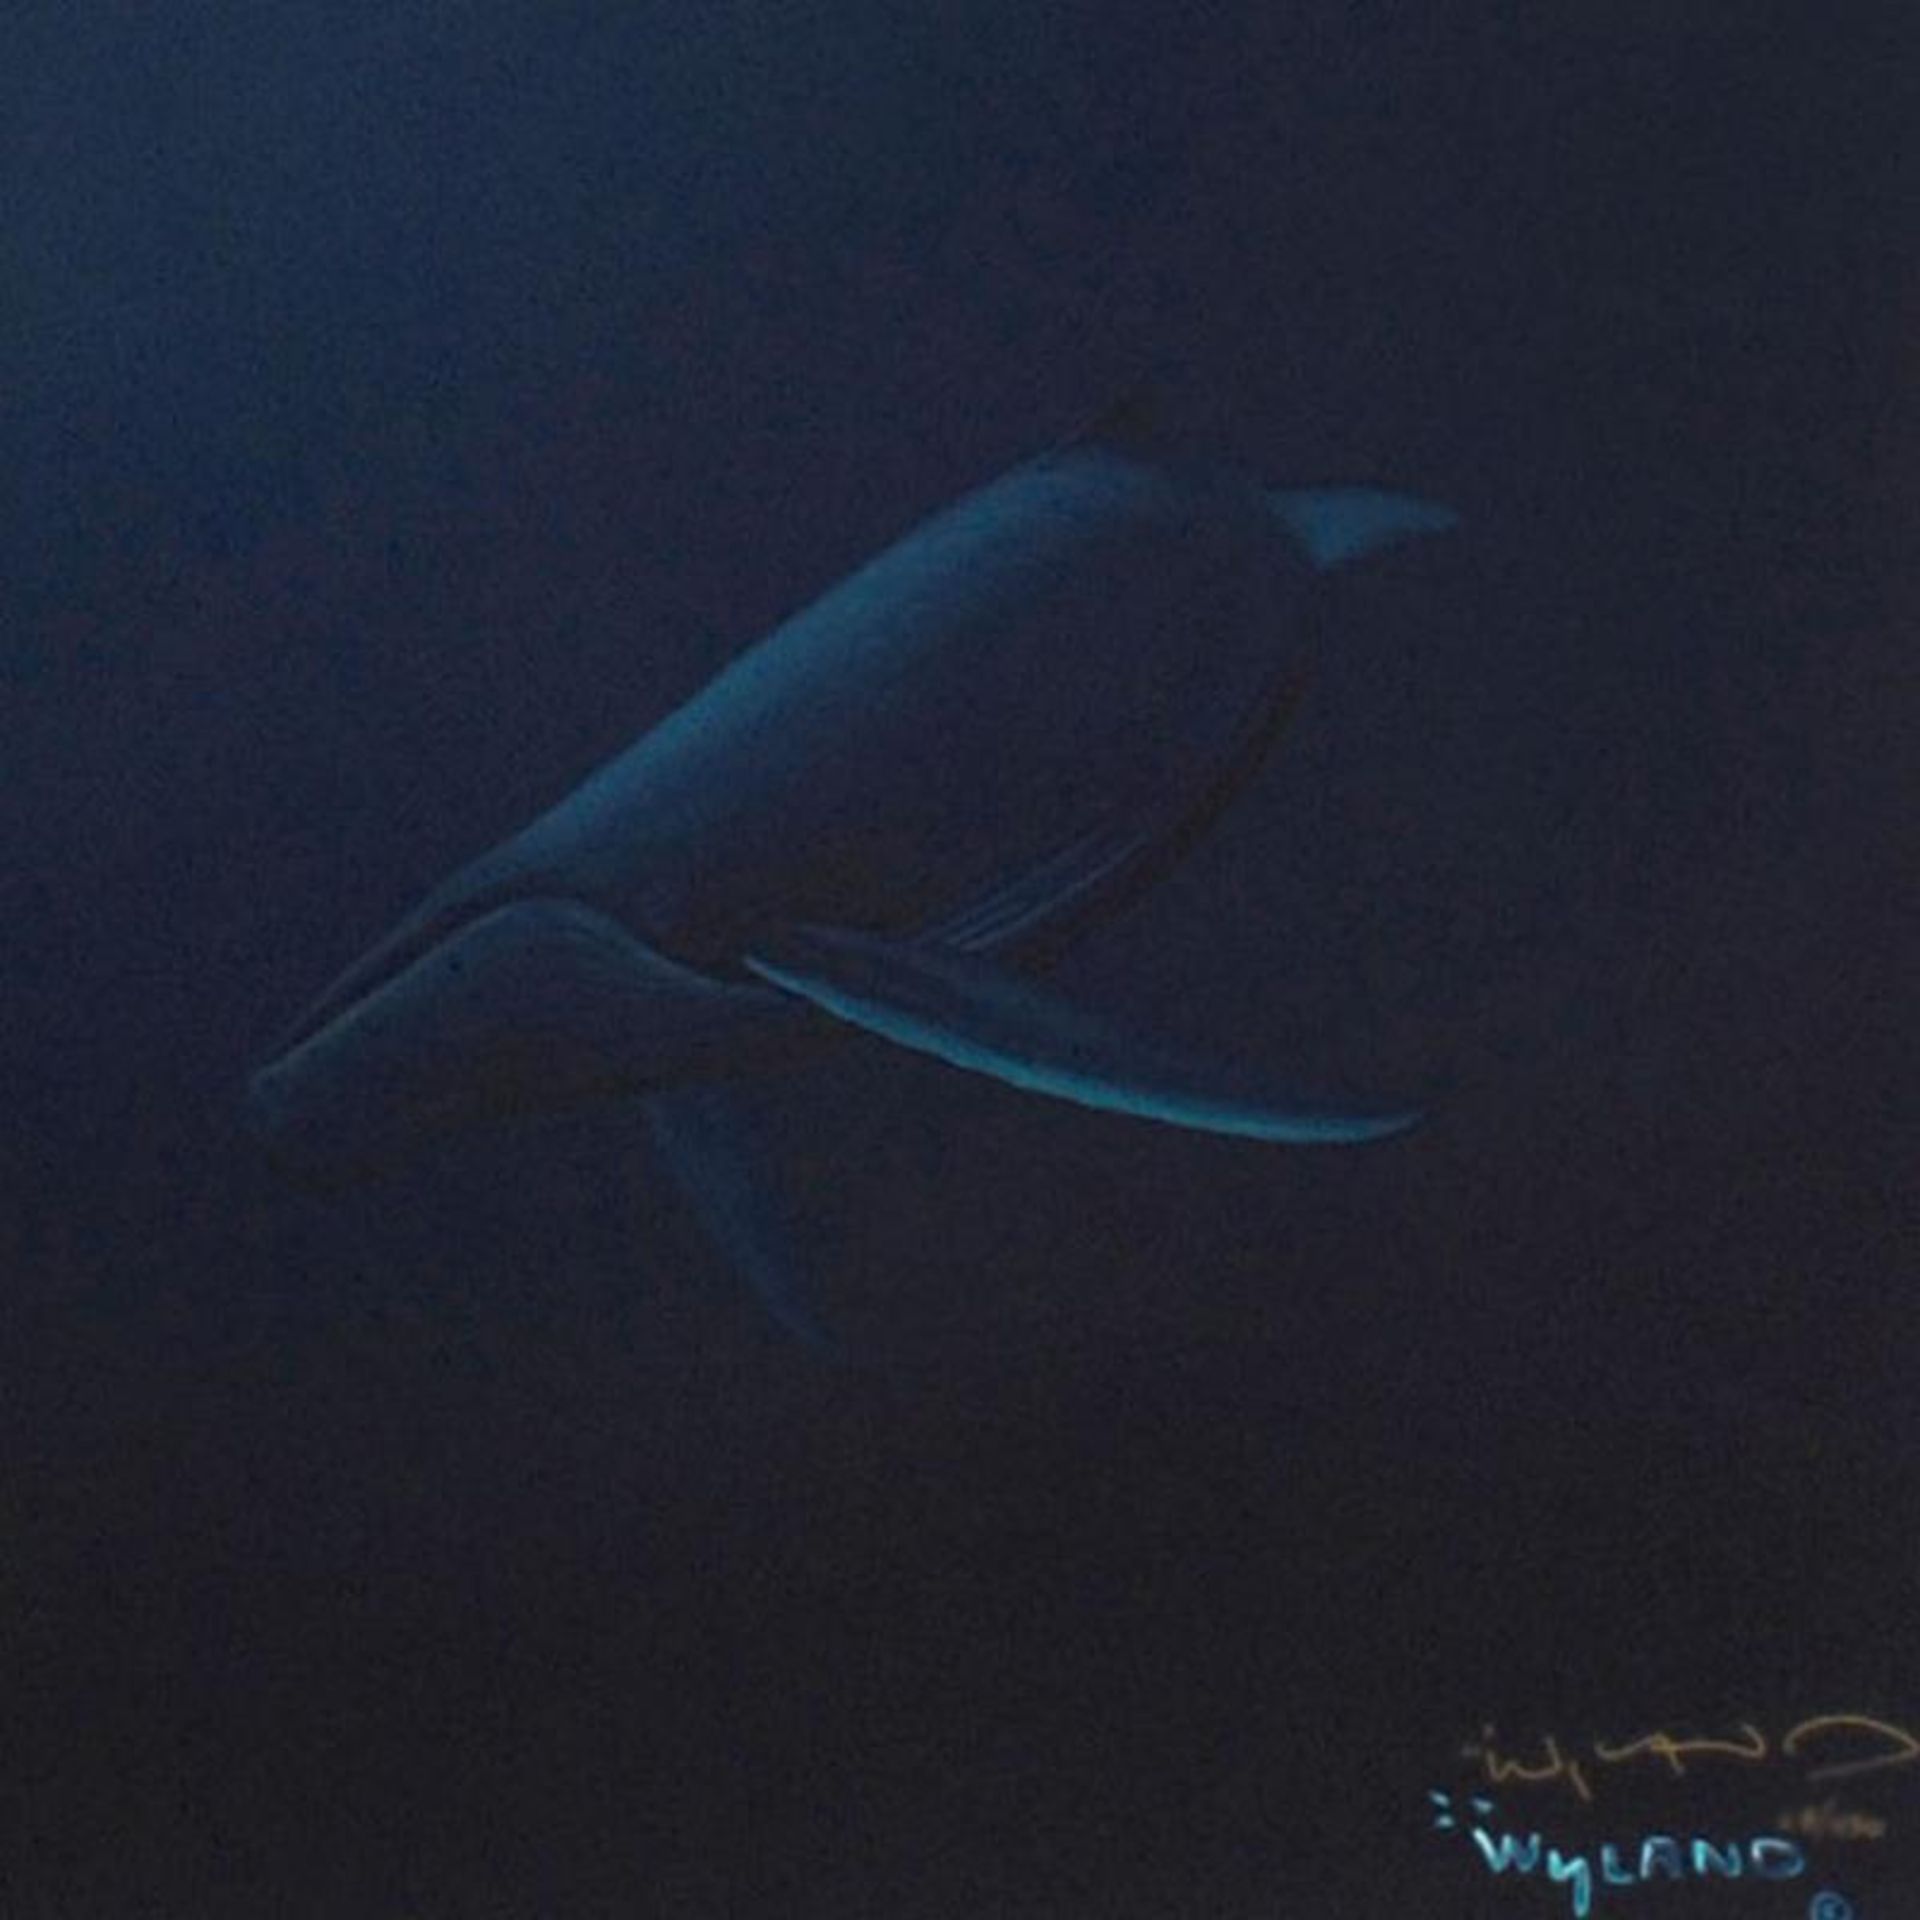 Whale Protection by Wyland - Image 3 of 3